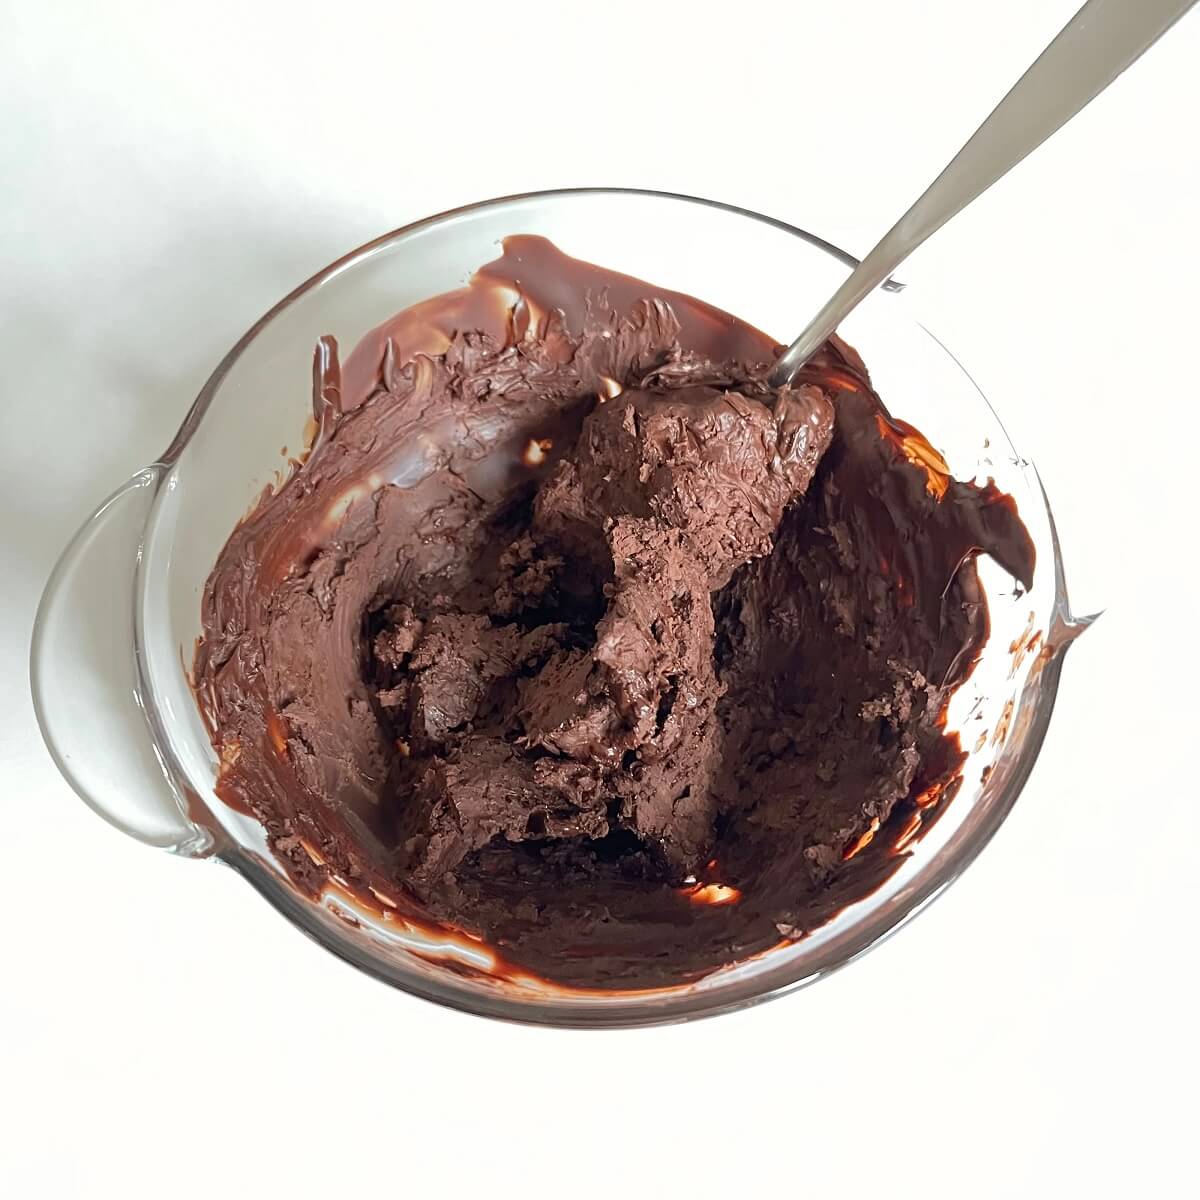 A solid mixture of dark chocolate and olive oil in a glass bowl with a metal spoon.